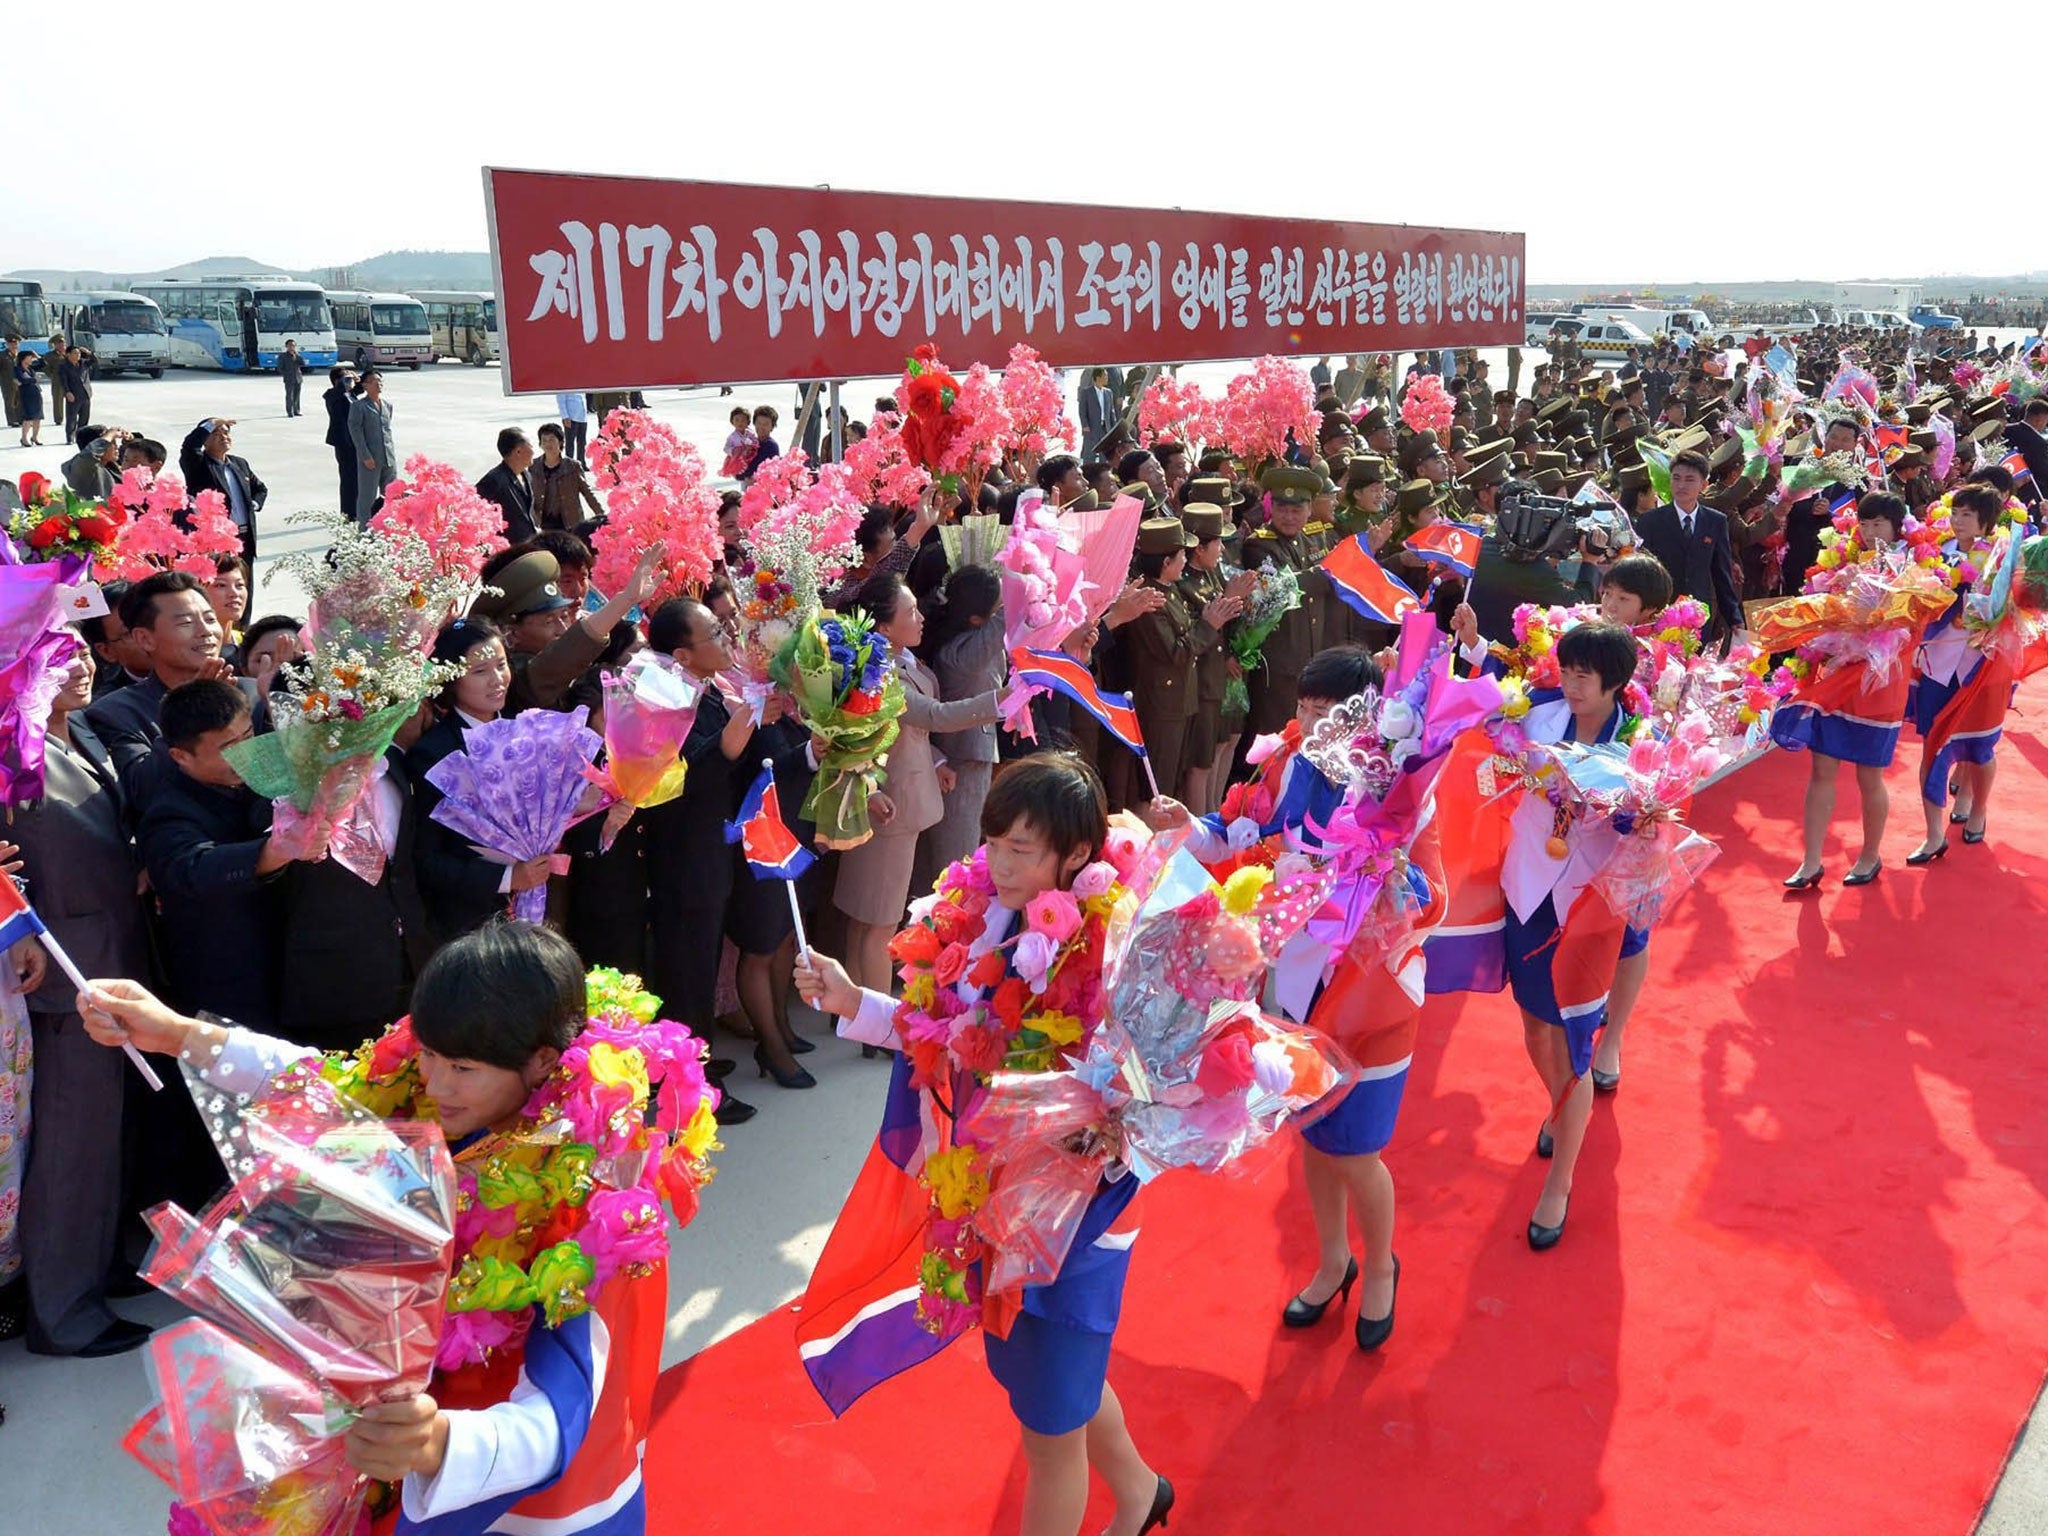 A picture released by the North Korean Central News Agency (KCNA) on 06 October 2014 shows North Korea's Asian Games athletes welcomed by officials and citizens after arriving at the airport in Pyongyang